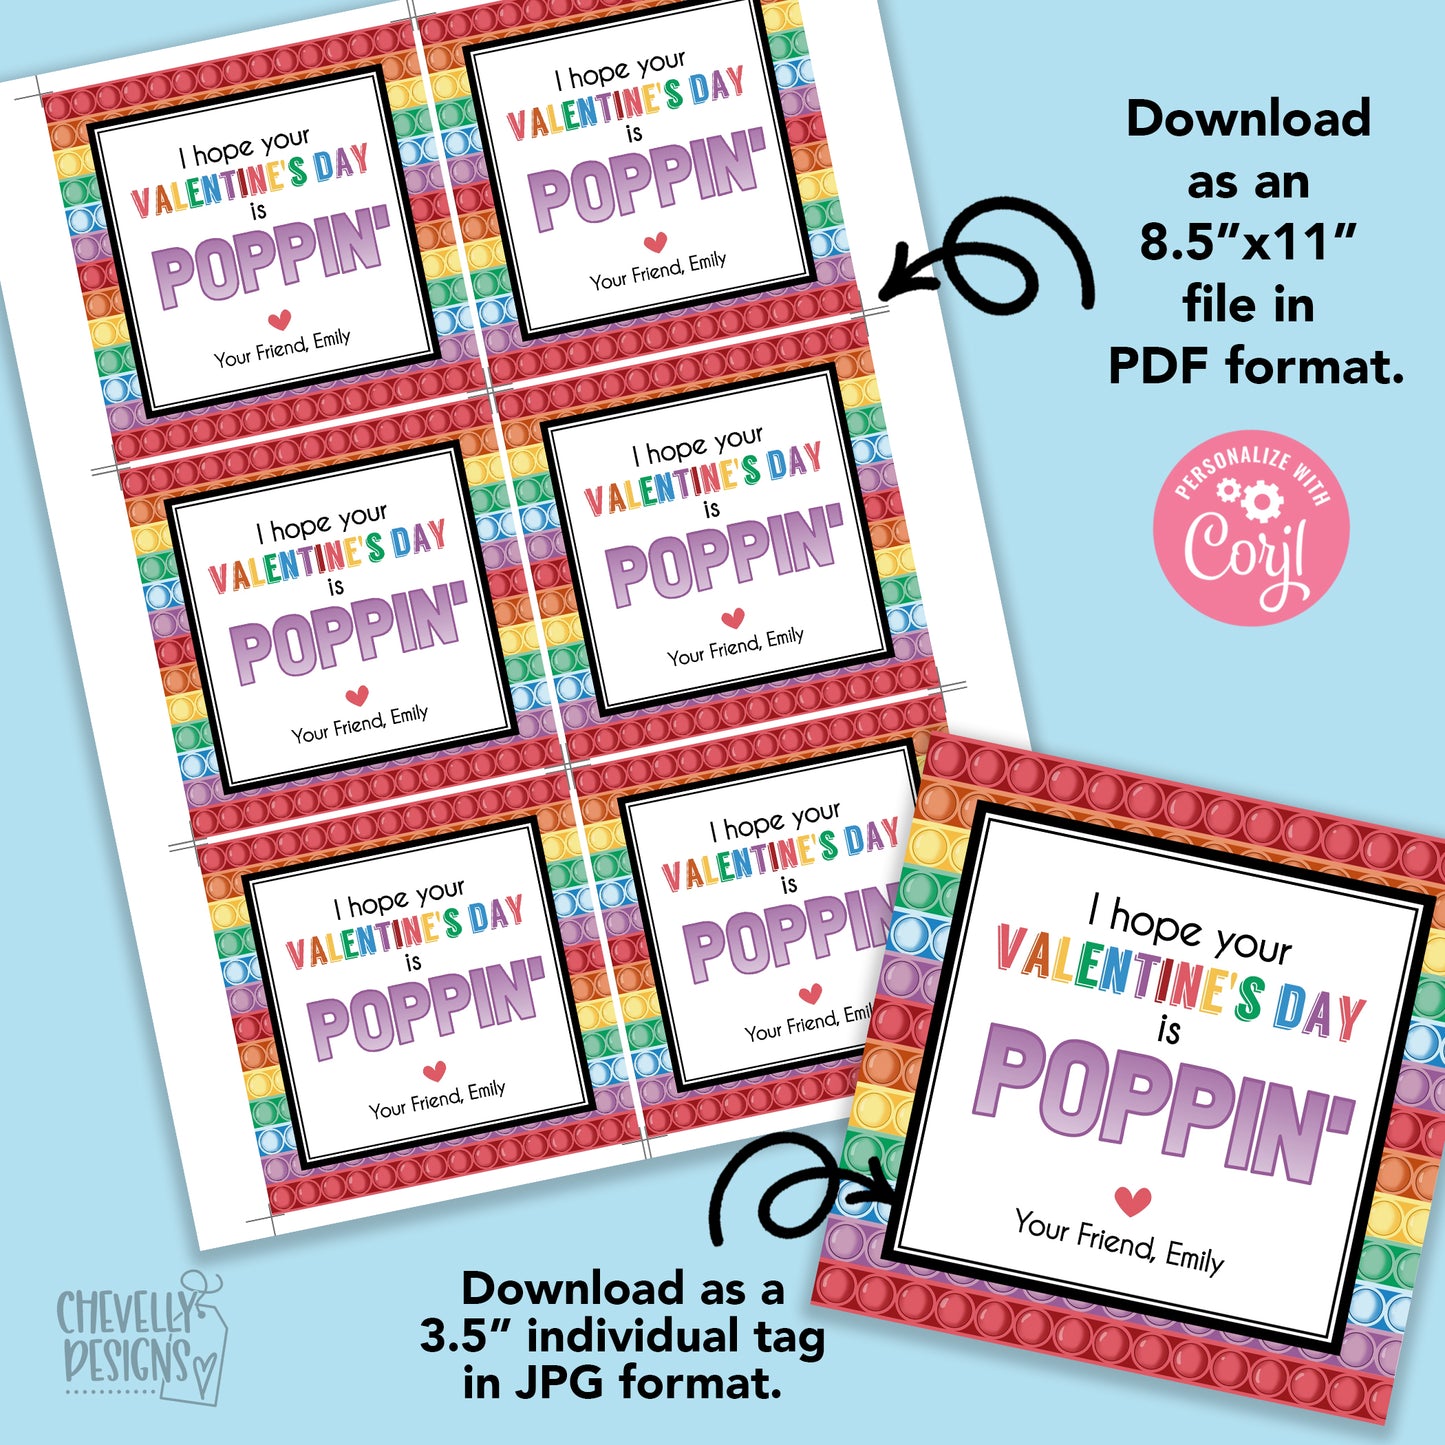 EDITABLE - I Hope Your Valentine's Day is Poppin - Class Valentine's Day Cards - Digital File